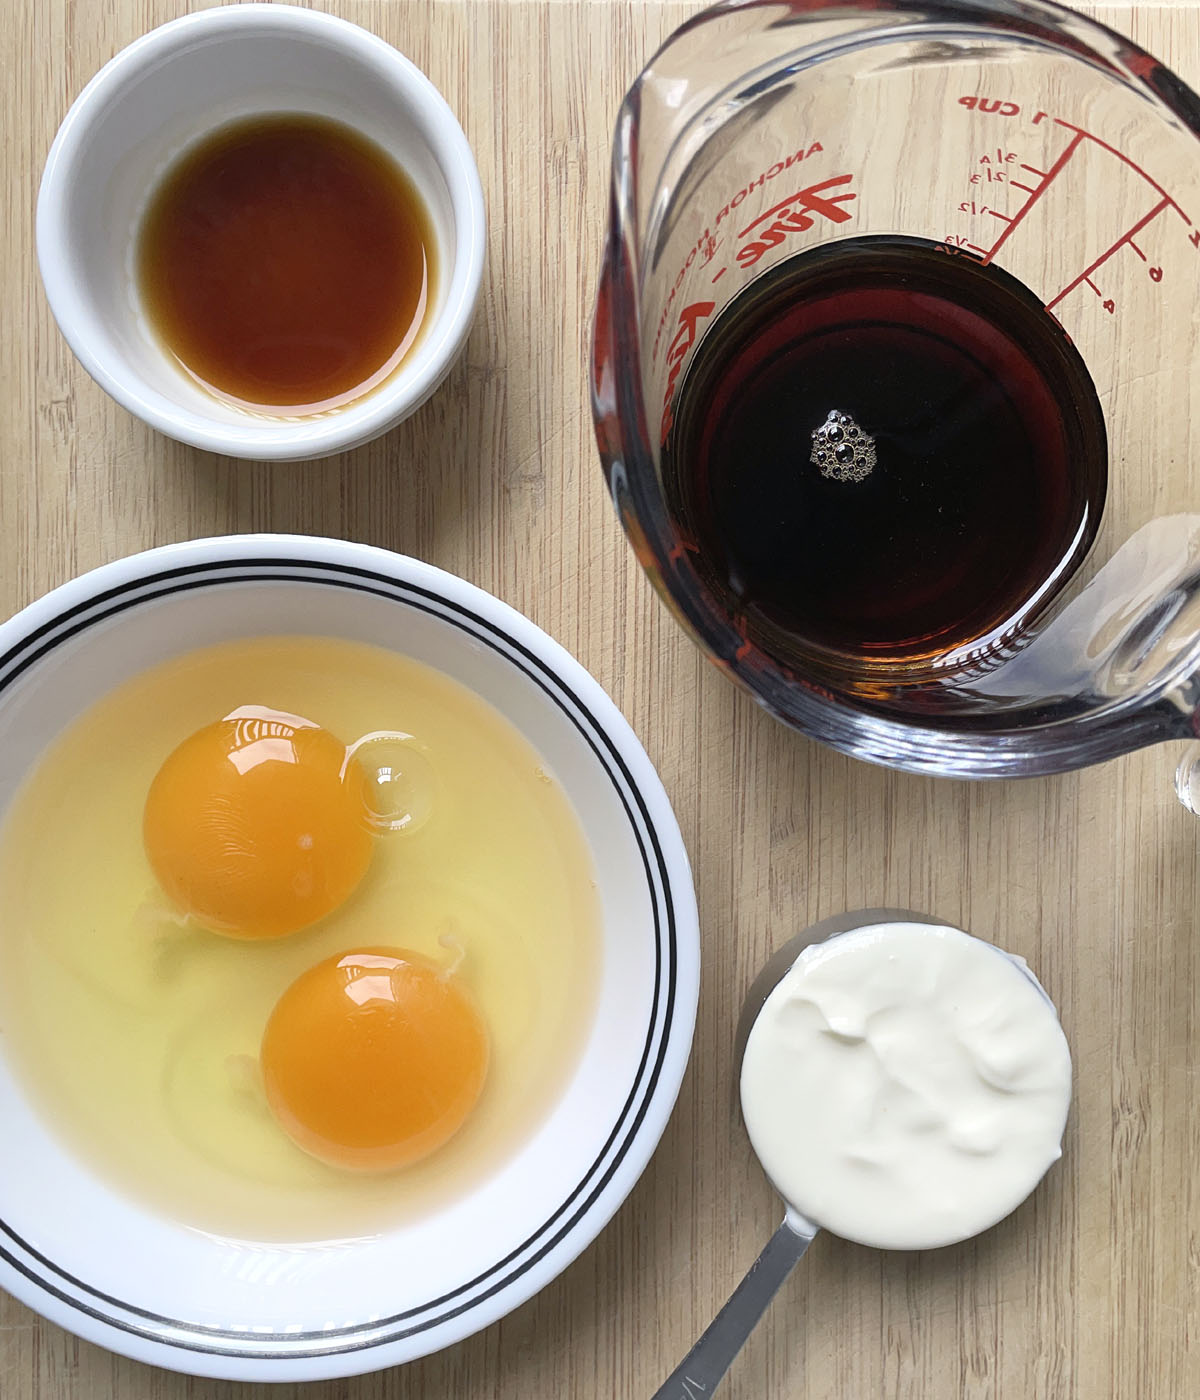 Two raw eggs in a bowl, a measuring cup with white yogurt, a measuring up with brown liquid, a white dish with brown liquid.